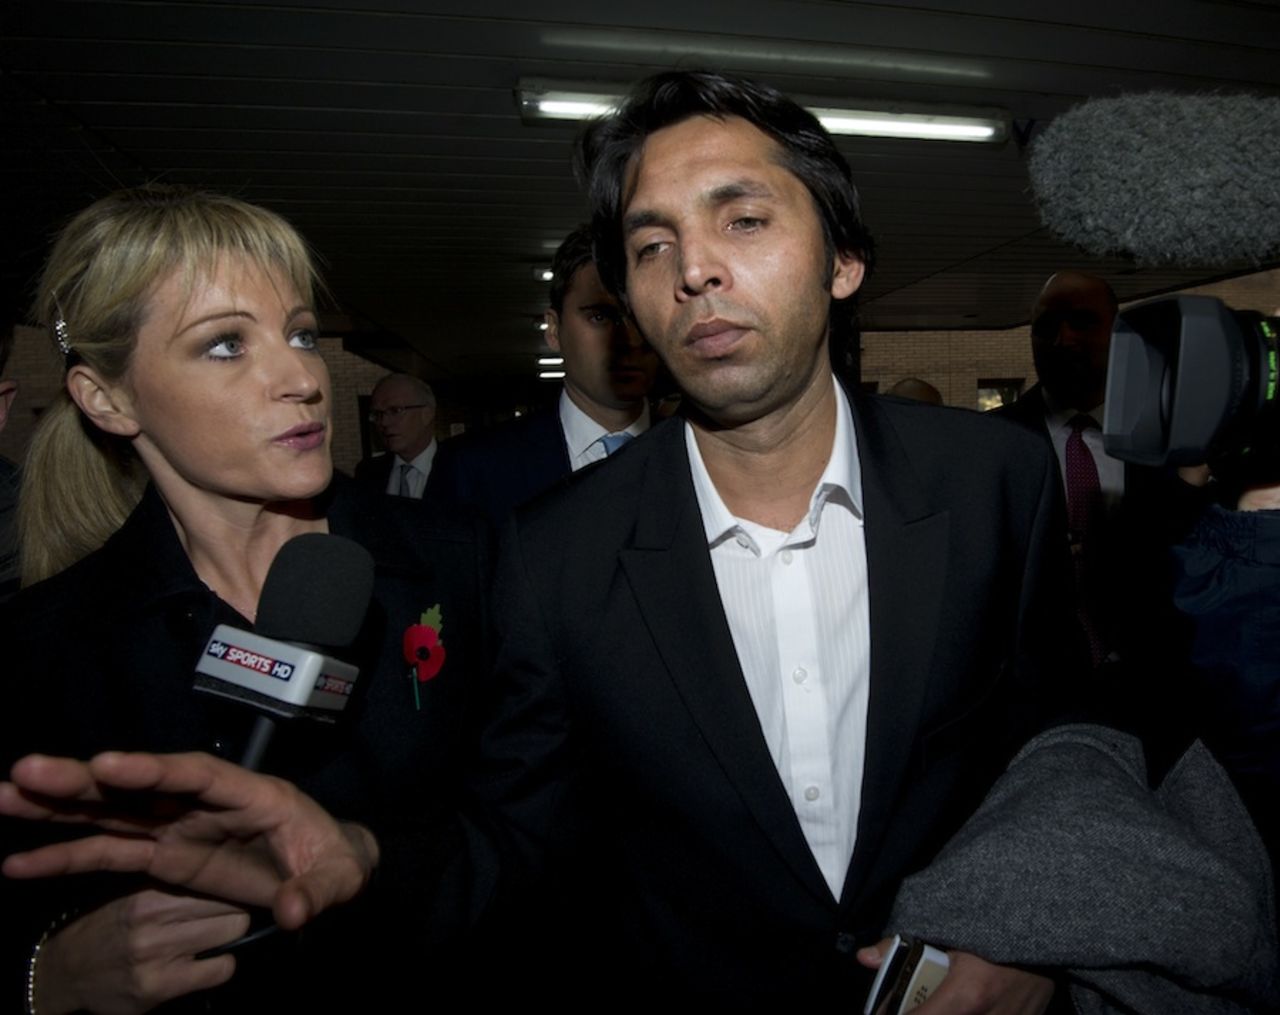 Mohammad Asif leaves Southwark Crown Court after being found guilty of cheating and accepting corrupt payments, London, November 1, 2011